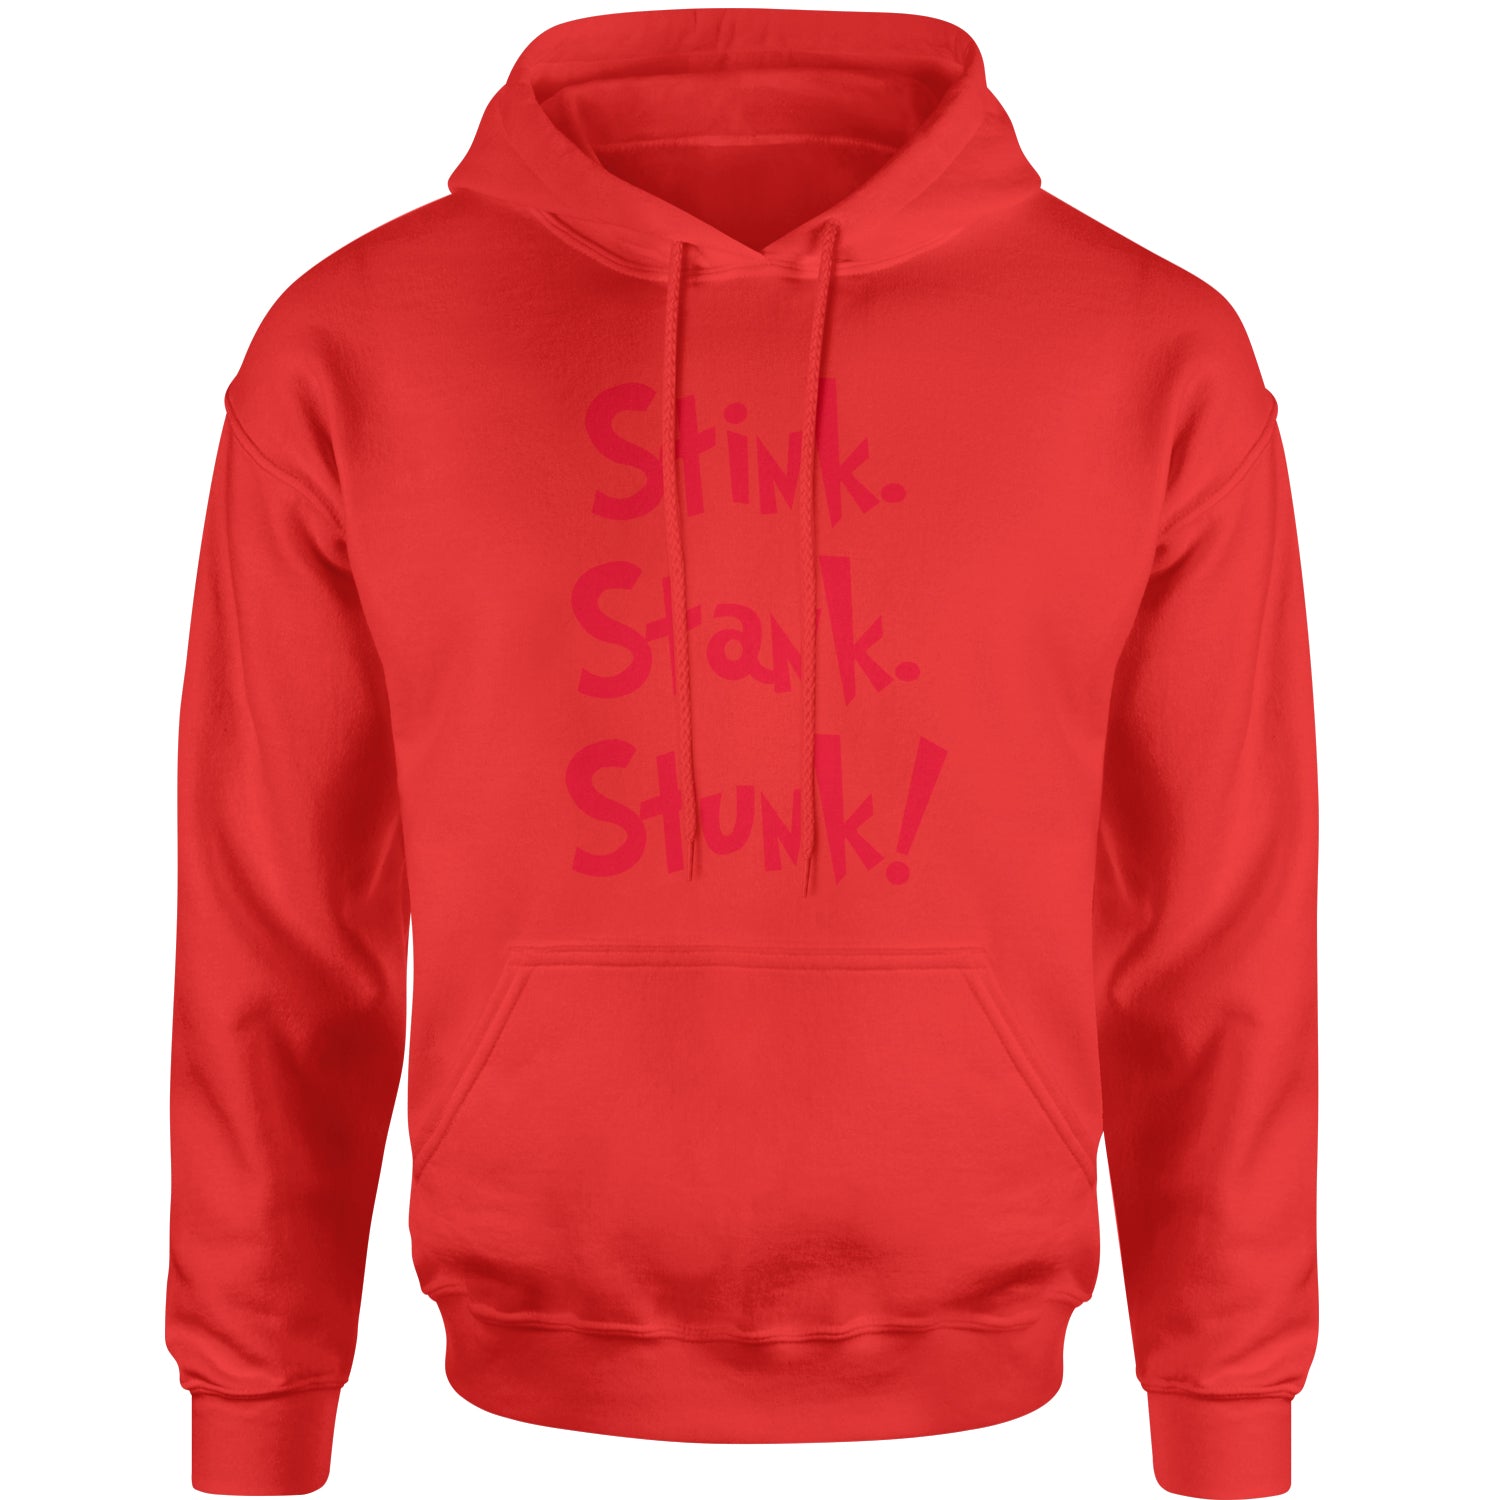 Stink Stank Stunk Grinch Adult Hoodie Sweatshirt christmas, holiday, sweater, ugly, xmas by Expression Tees